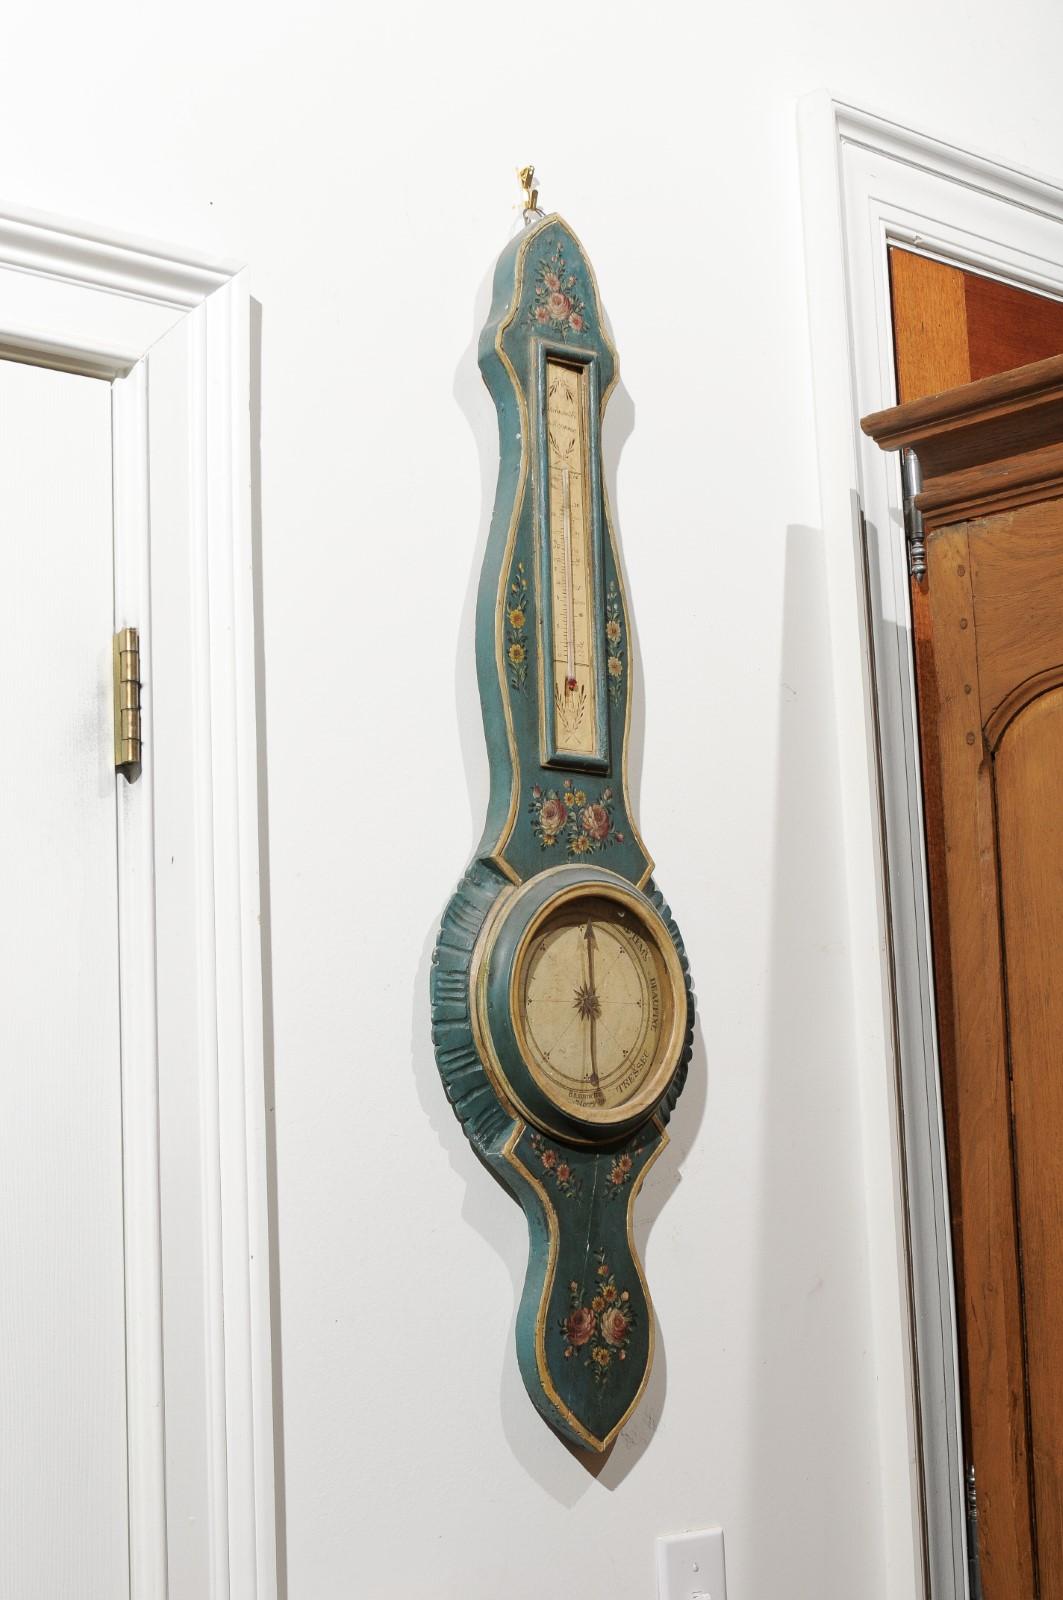 18th Century French Tall Provençal Barometer with Hand Painted Floral Decor, circa 1780